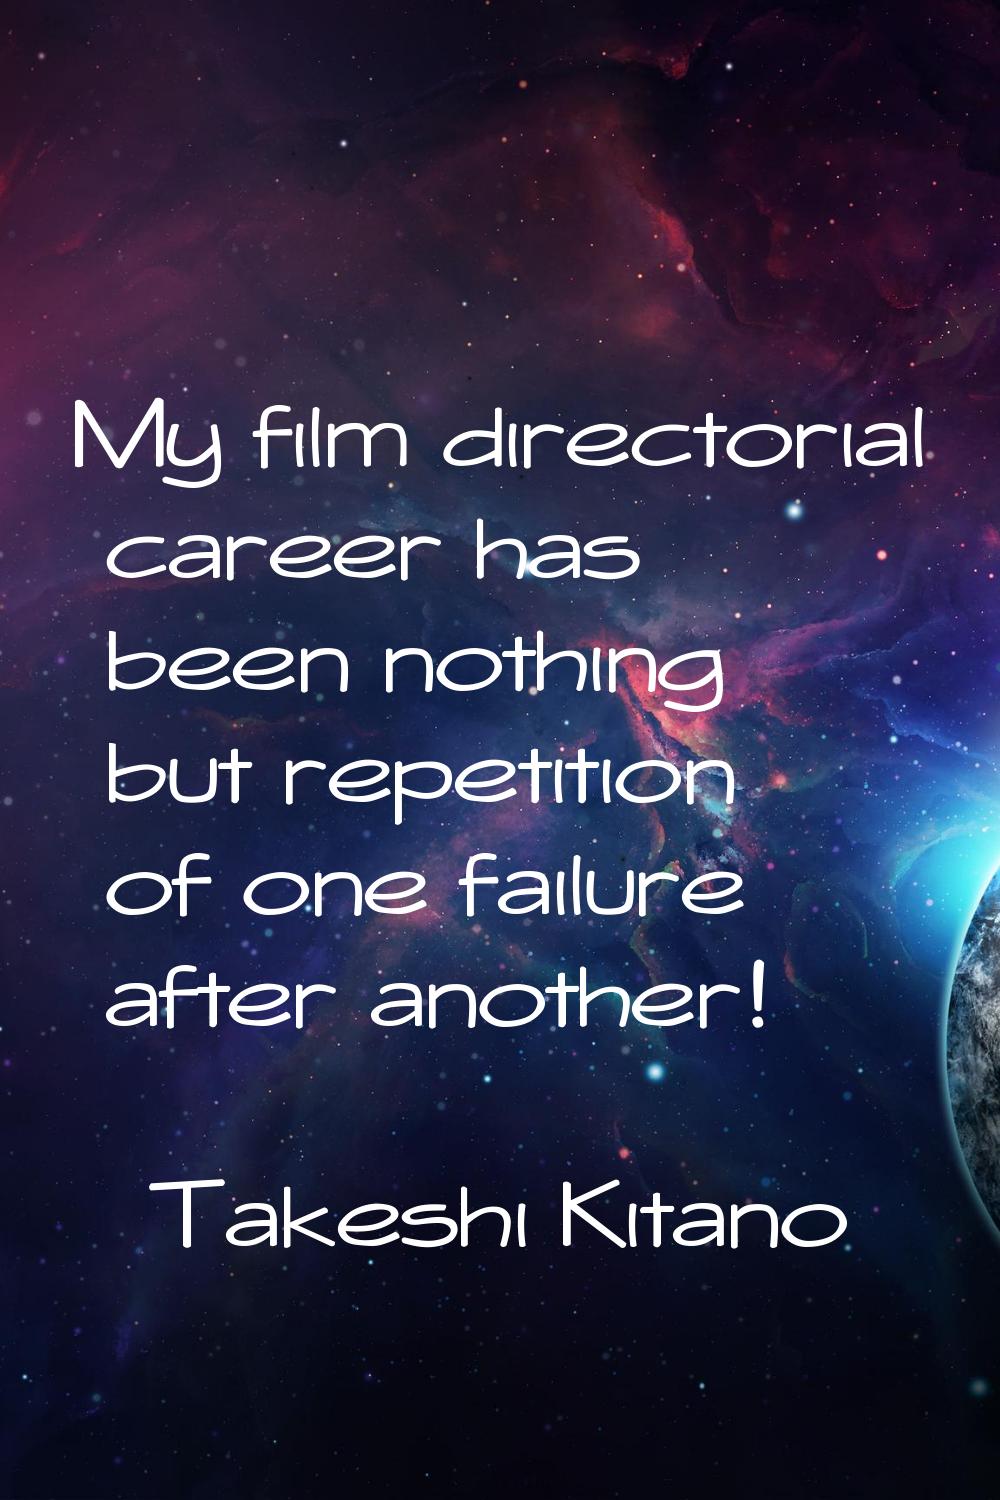 My film directorial career has been nothing but repetition of one failure after another!